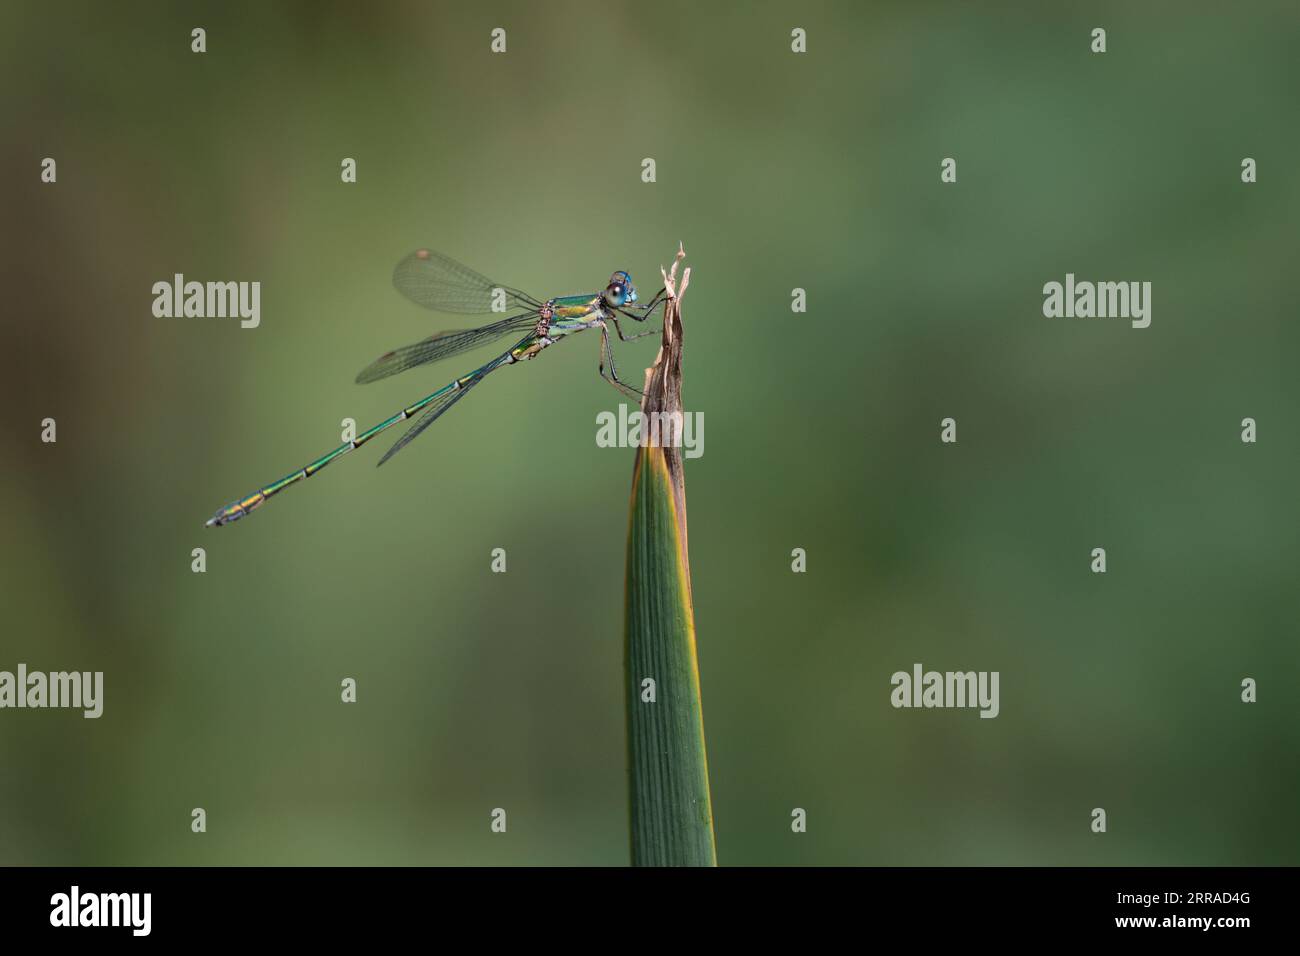 Emerald damselfly Lestes sponsa, metalic green and brown body brown wing spots blue and brown eyes perched on pond vegetation copy space Stock Photo